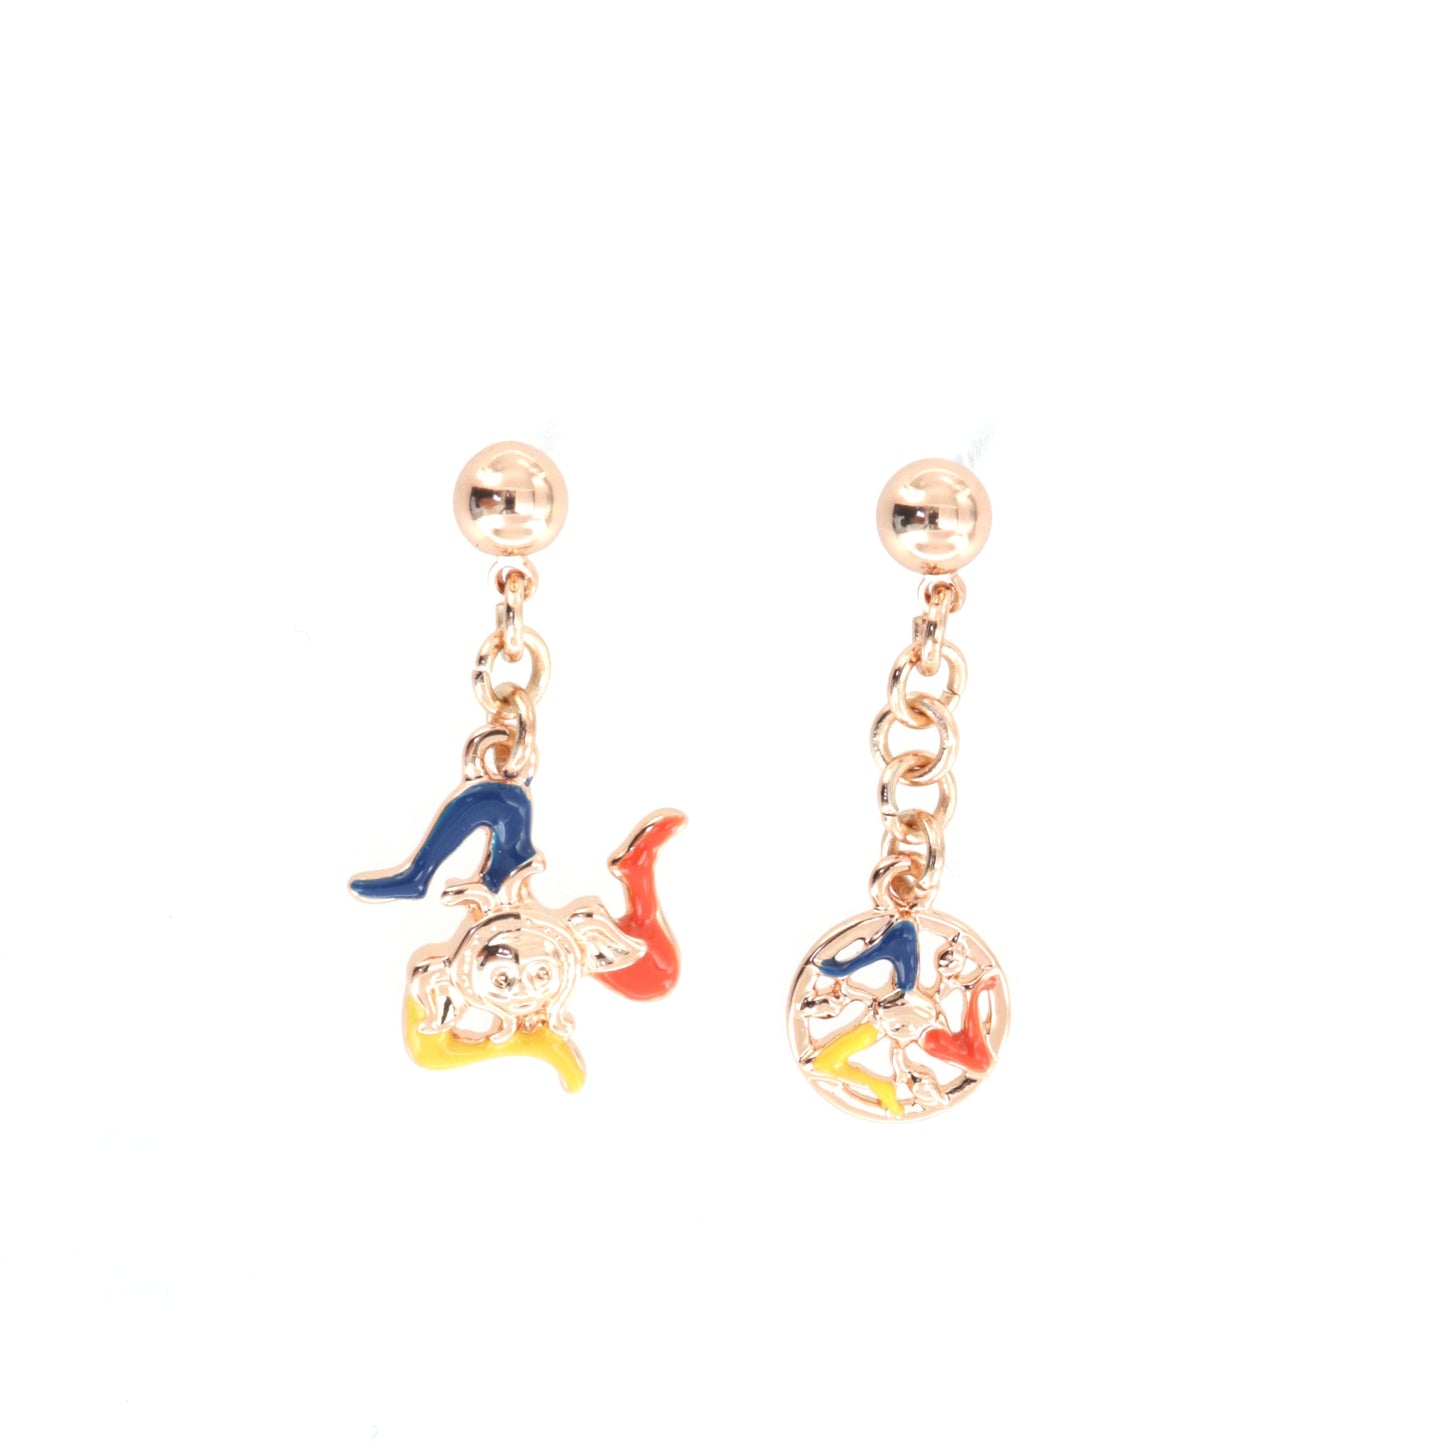 Metal earrings with Sicilian Trinacria pendant embellished with colored glazes